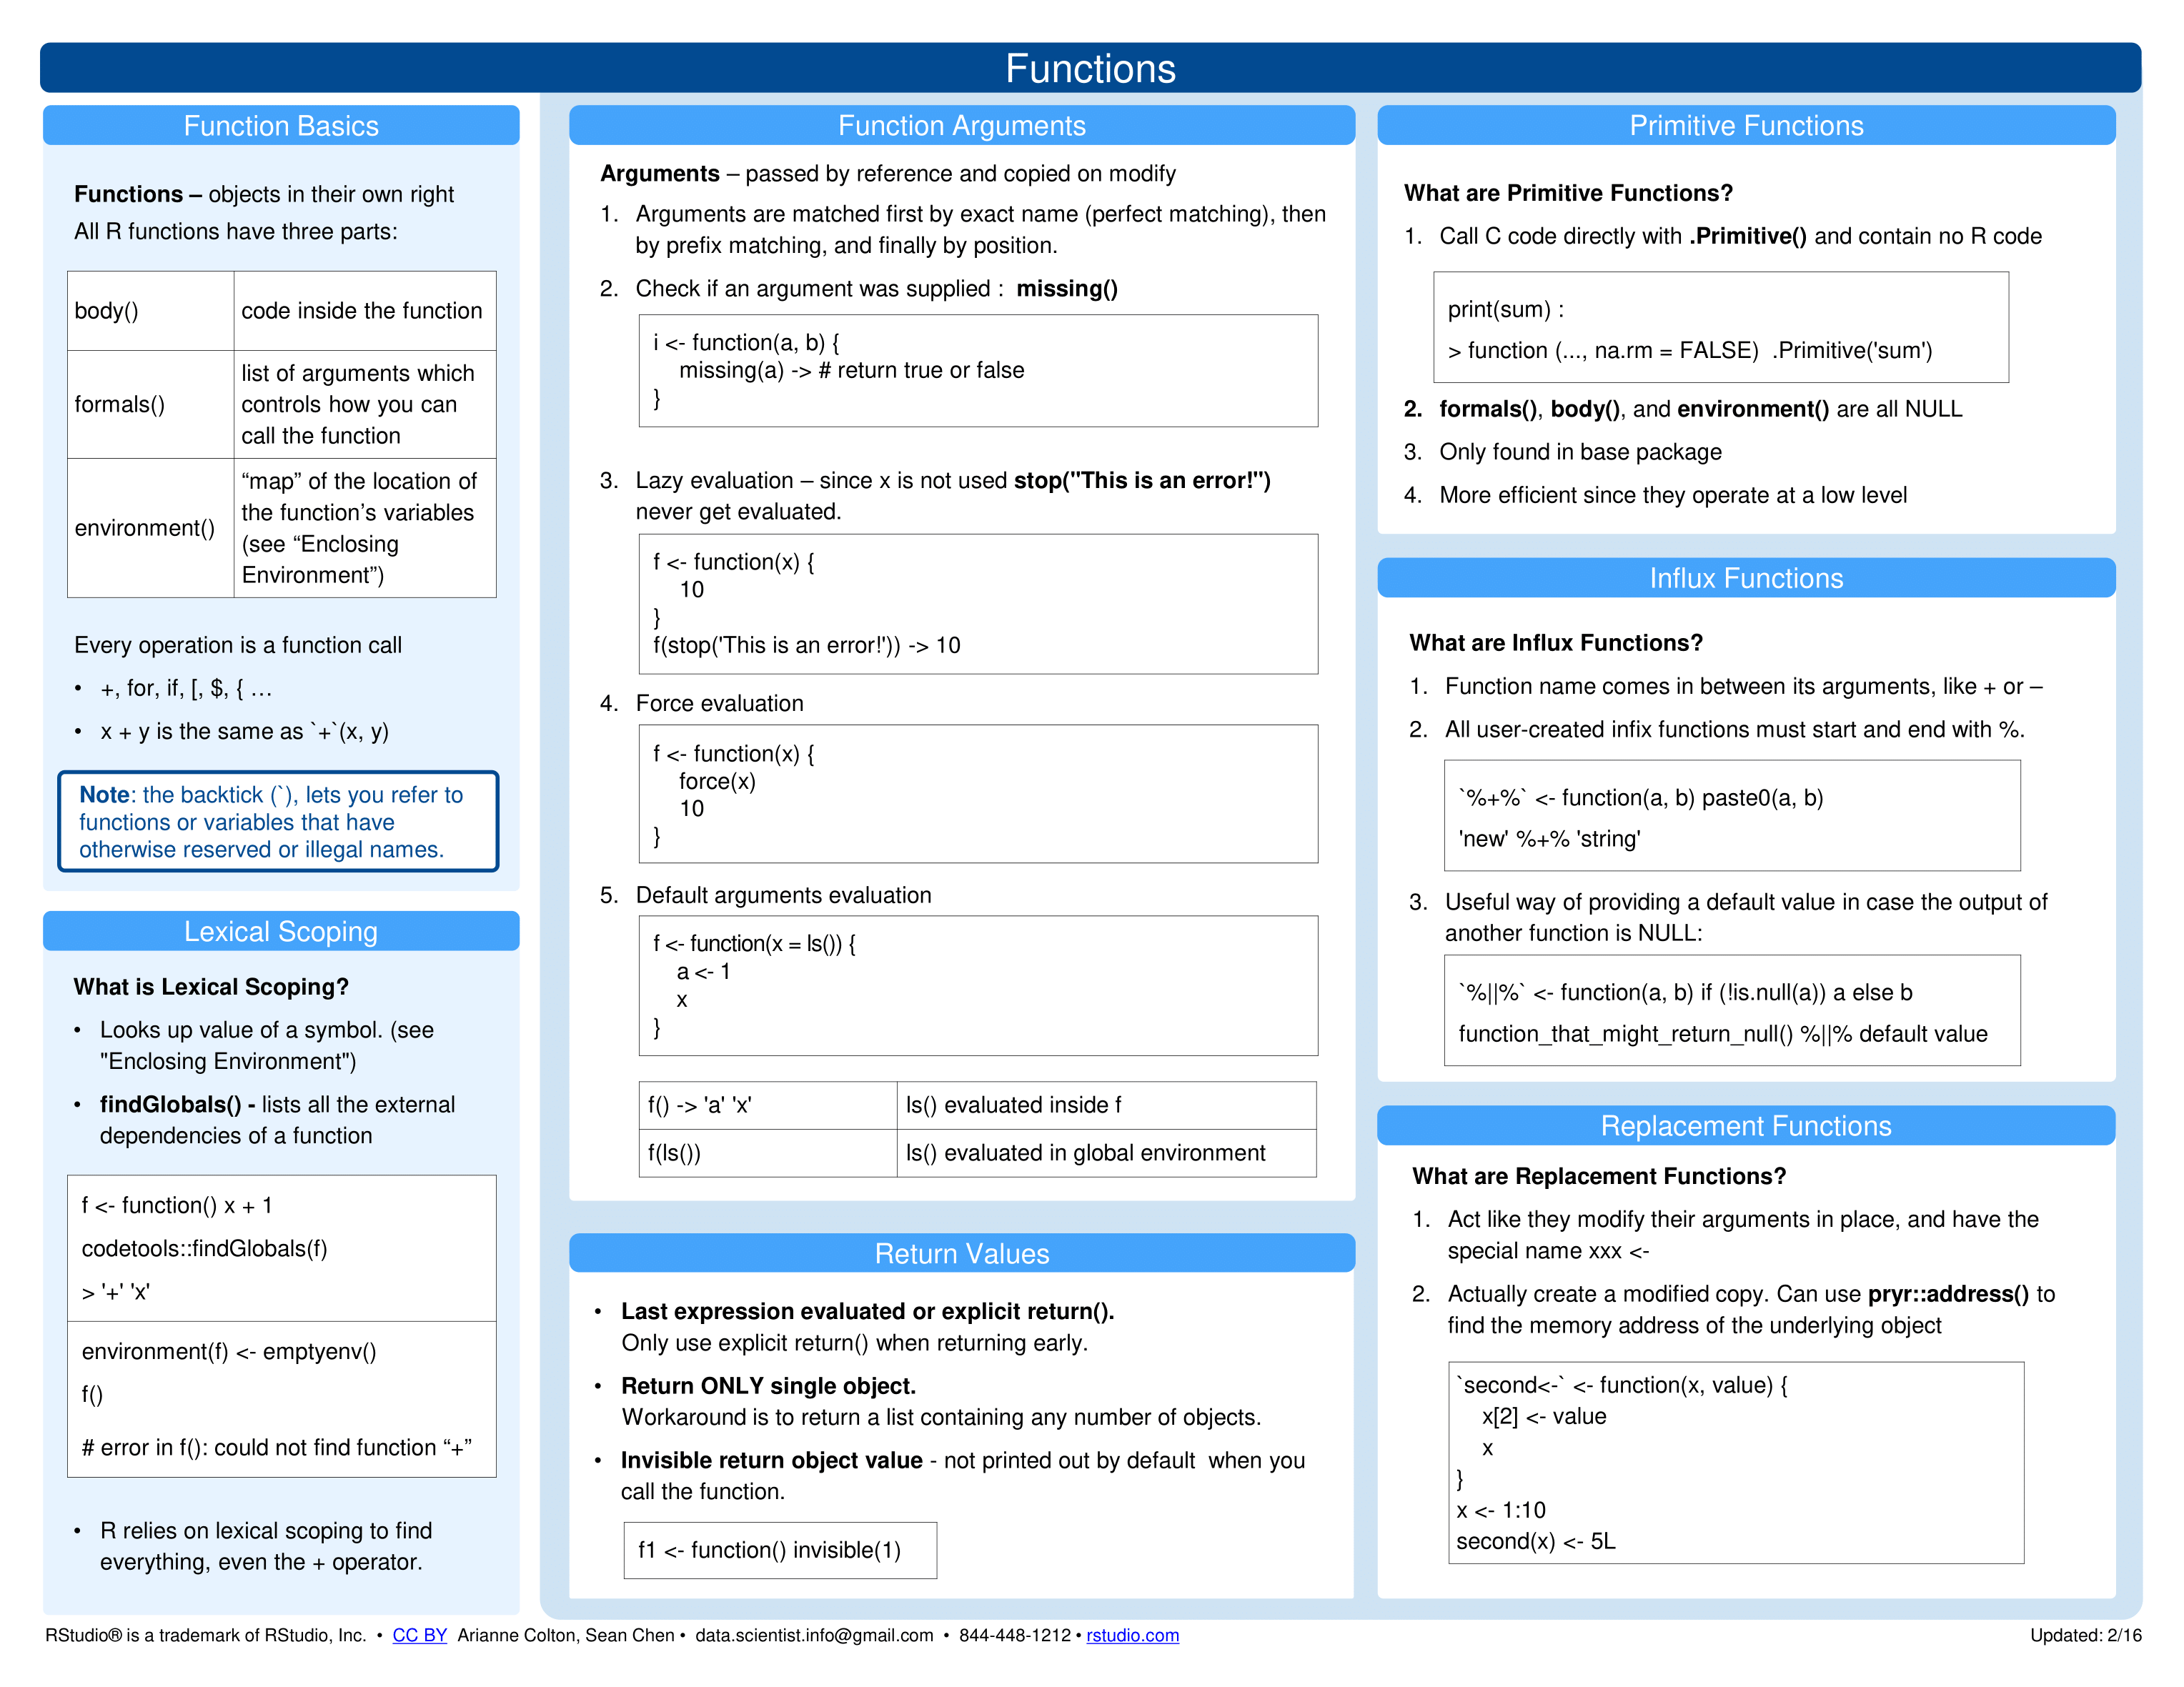 Summary on functions from the Posit cheatsheets on Advanced R.